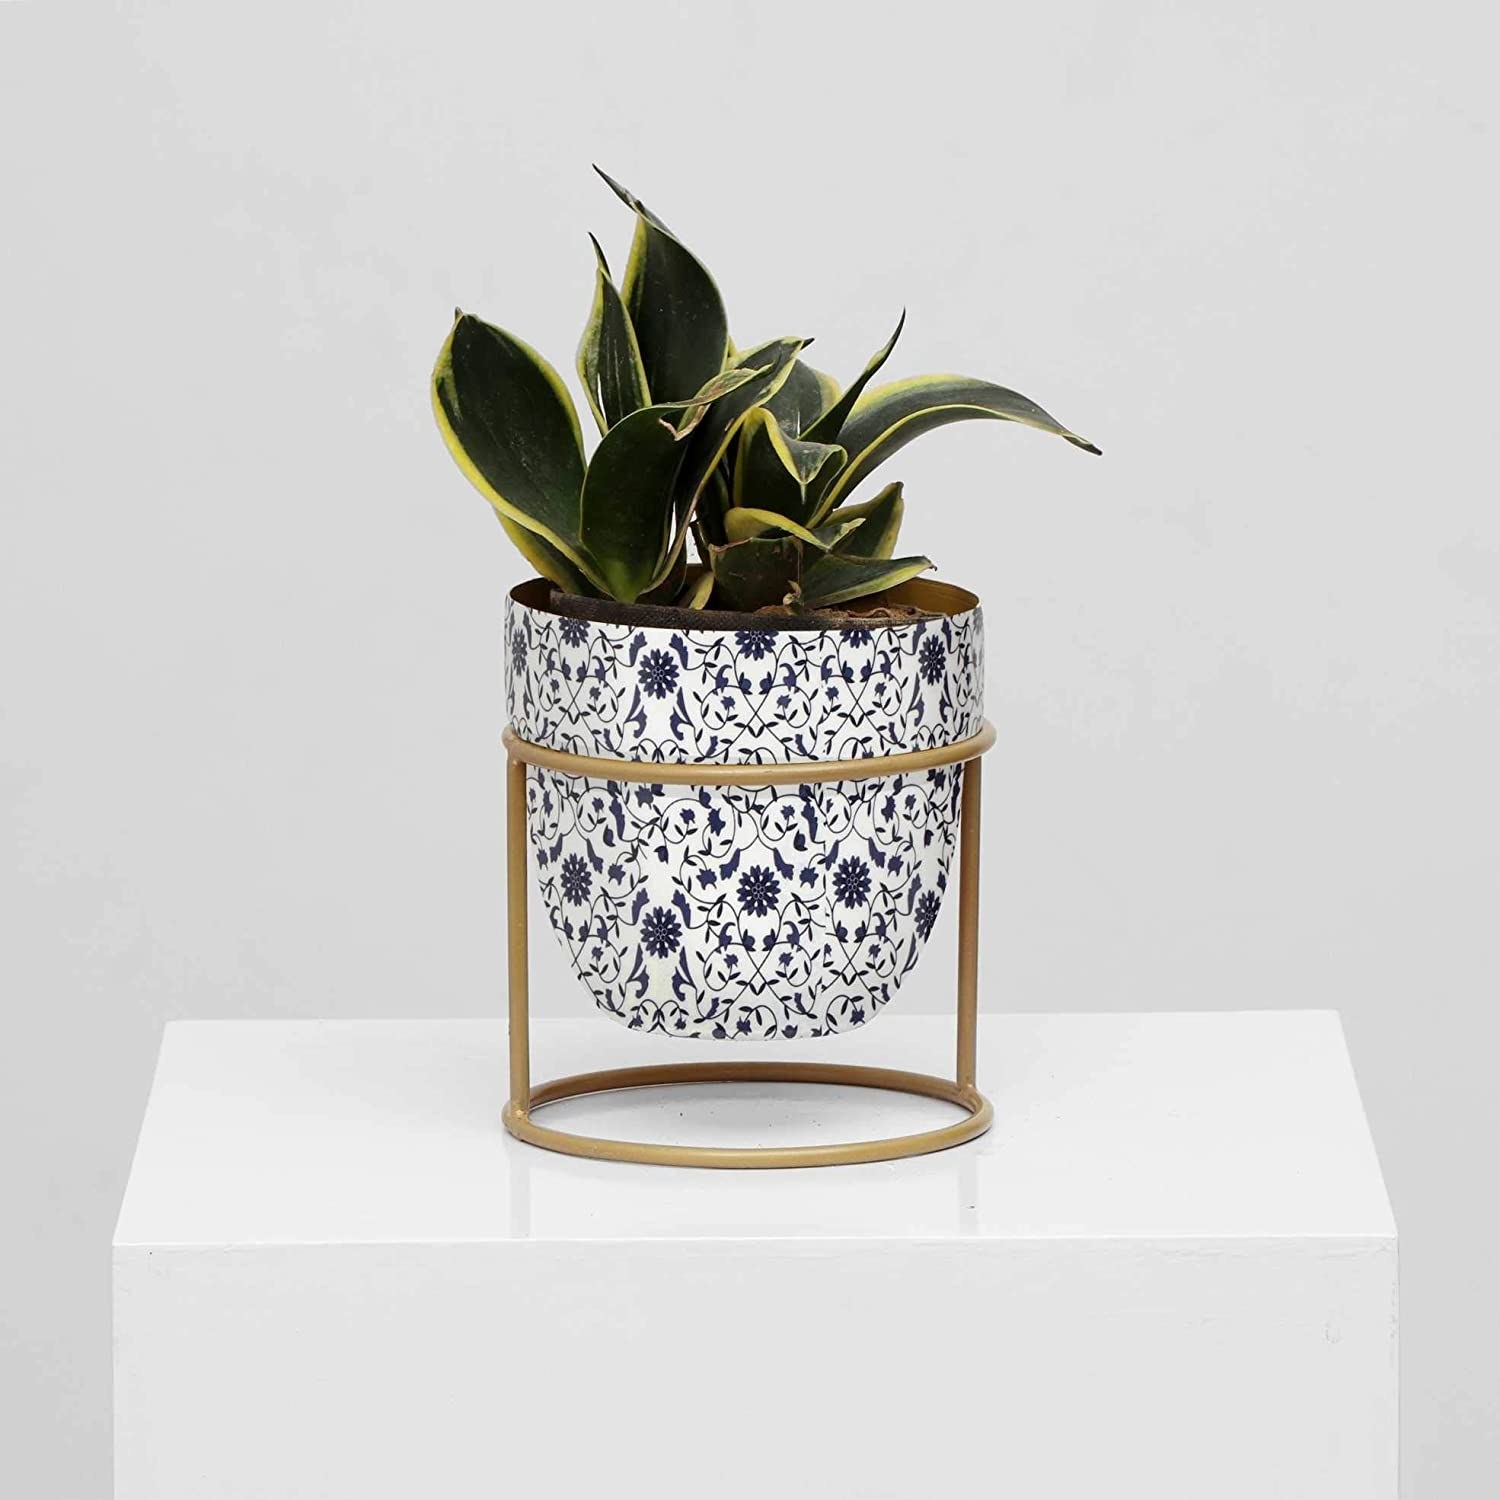 A plant holder in white with a navy blue floral design. It is placed in a golden stand.